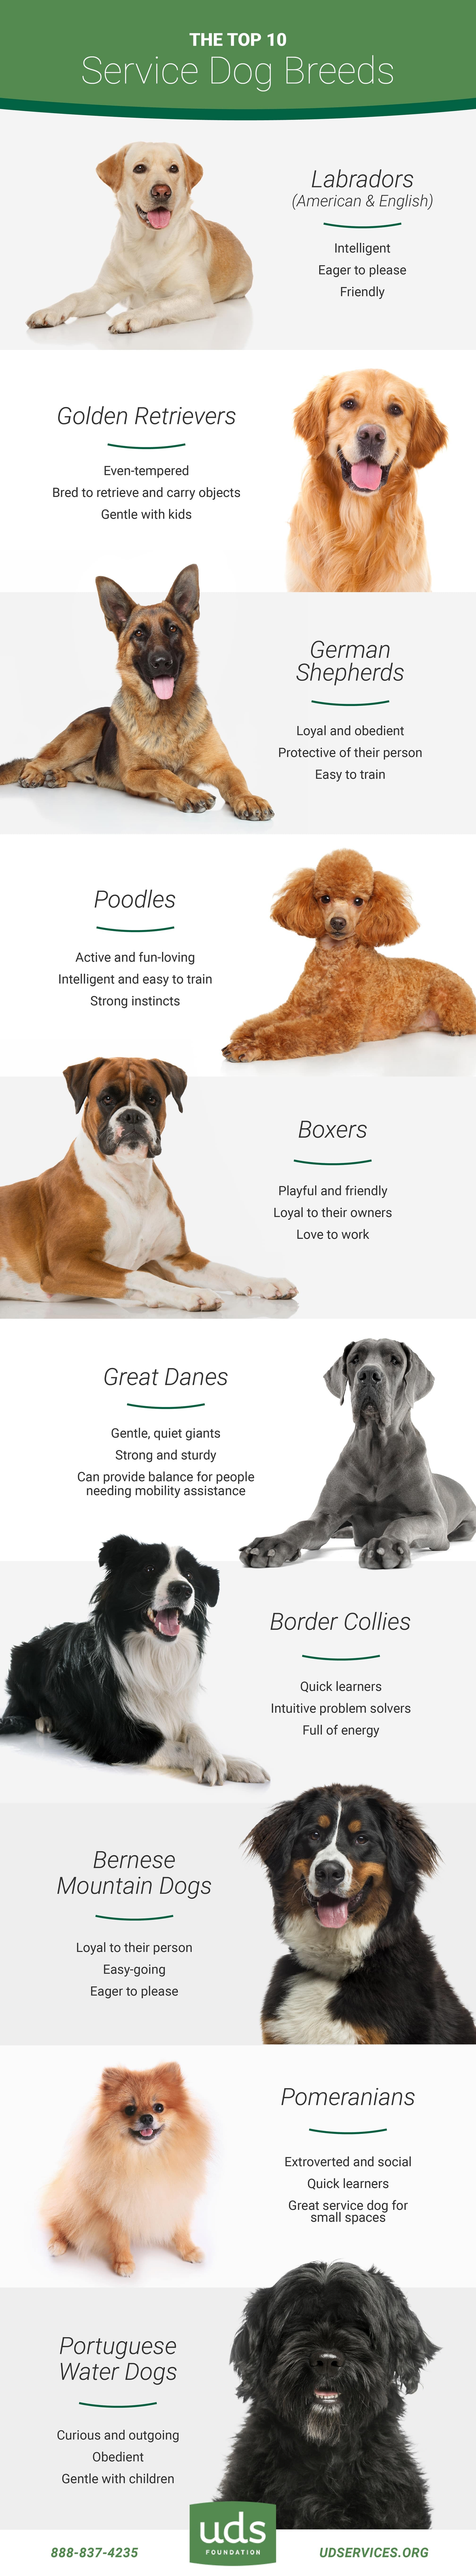 Types of Services Dogs & What They Are Used For - UDS